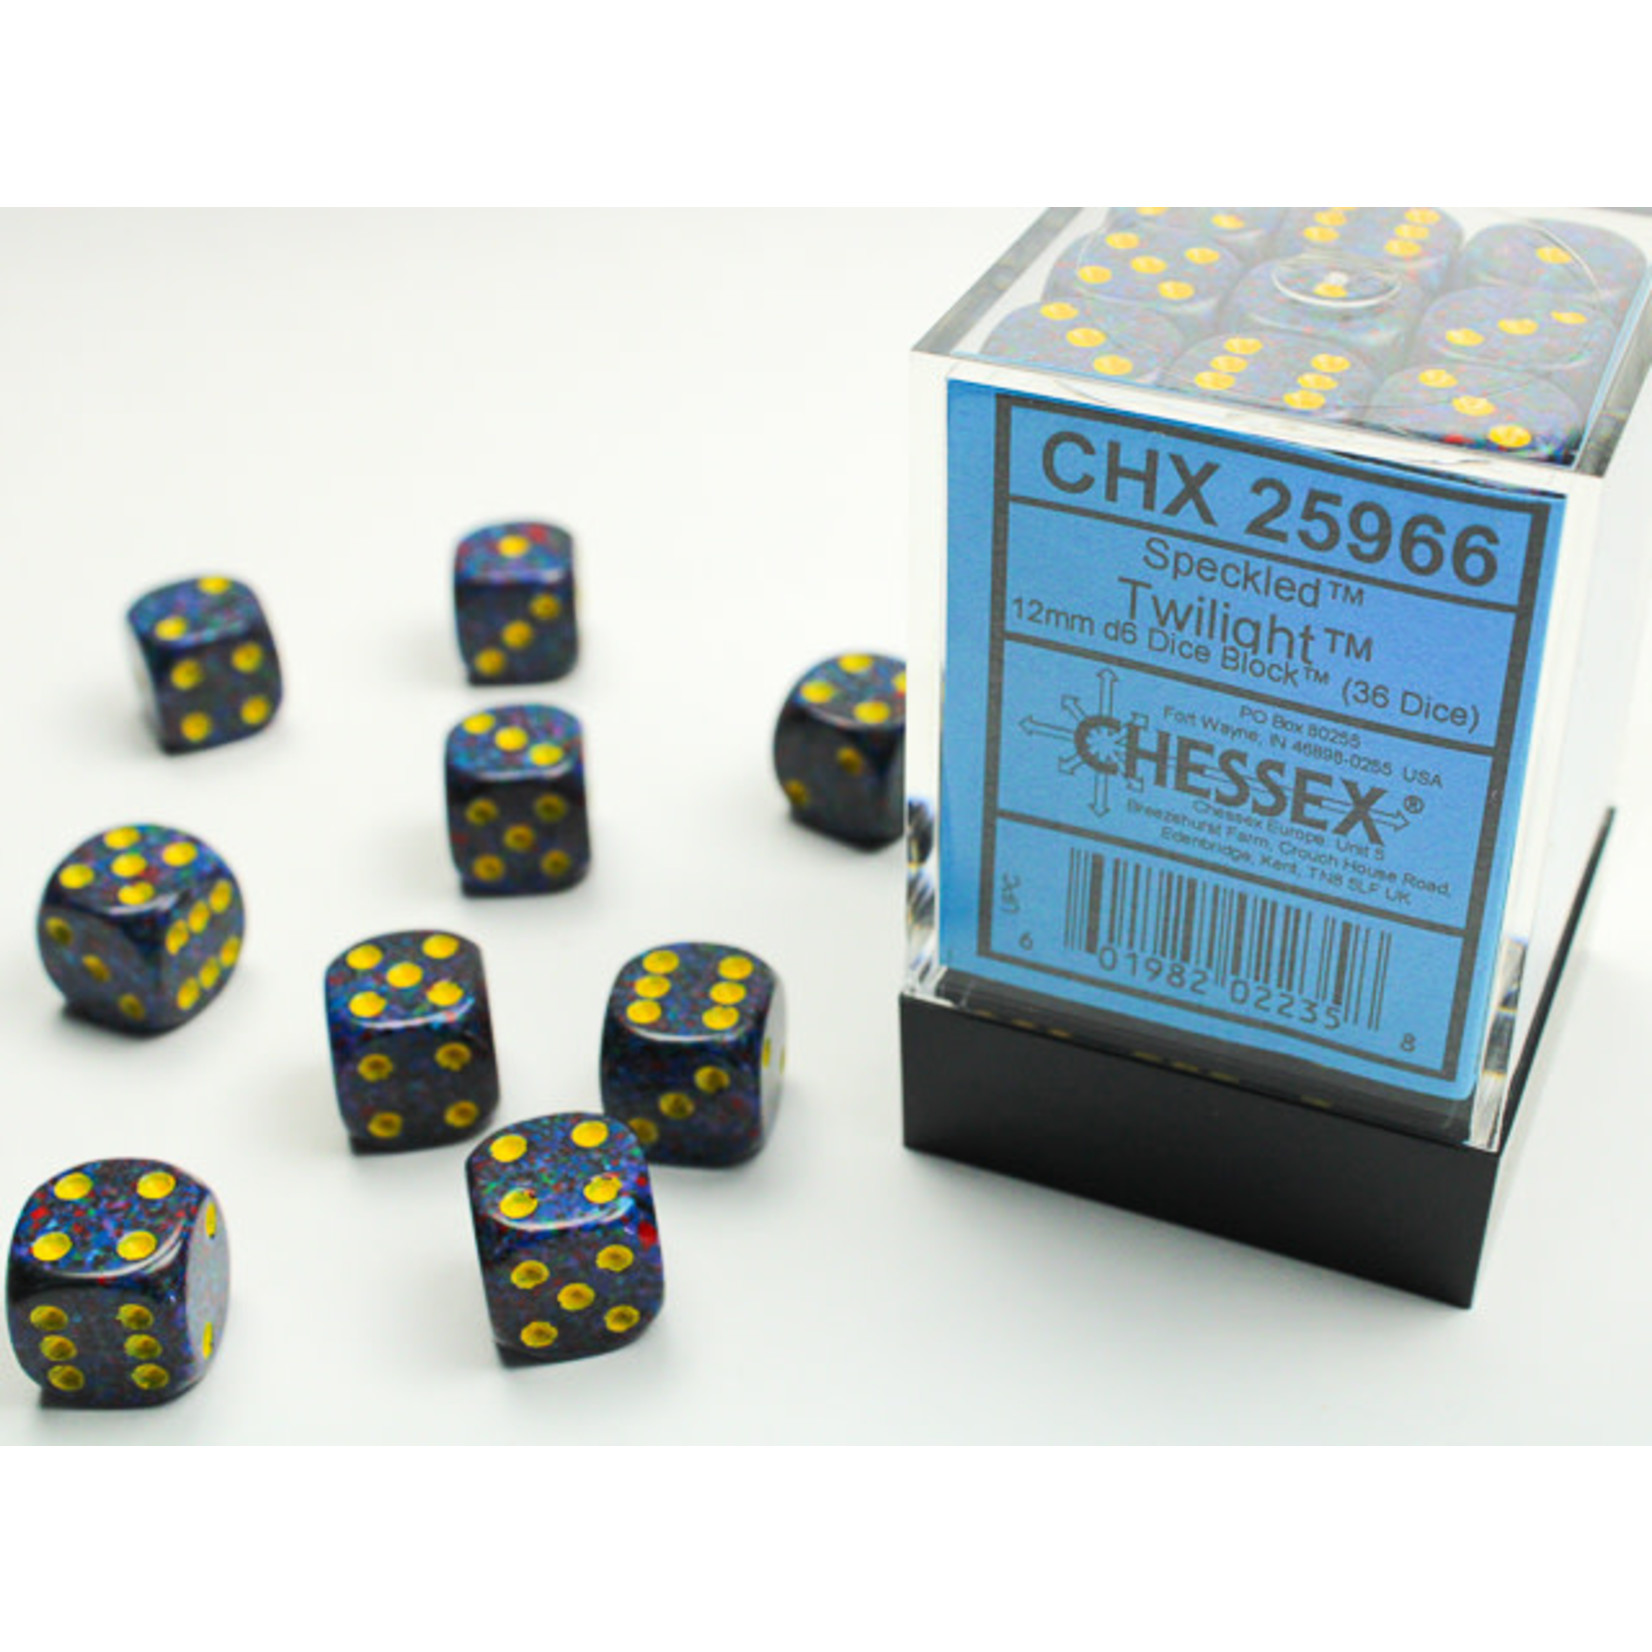 Chessex Dice 12mm 25966 36pc Speckled Twilight